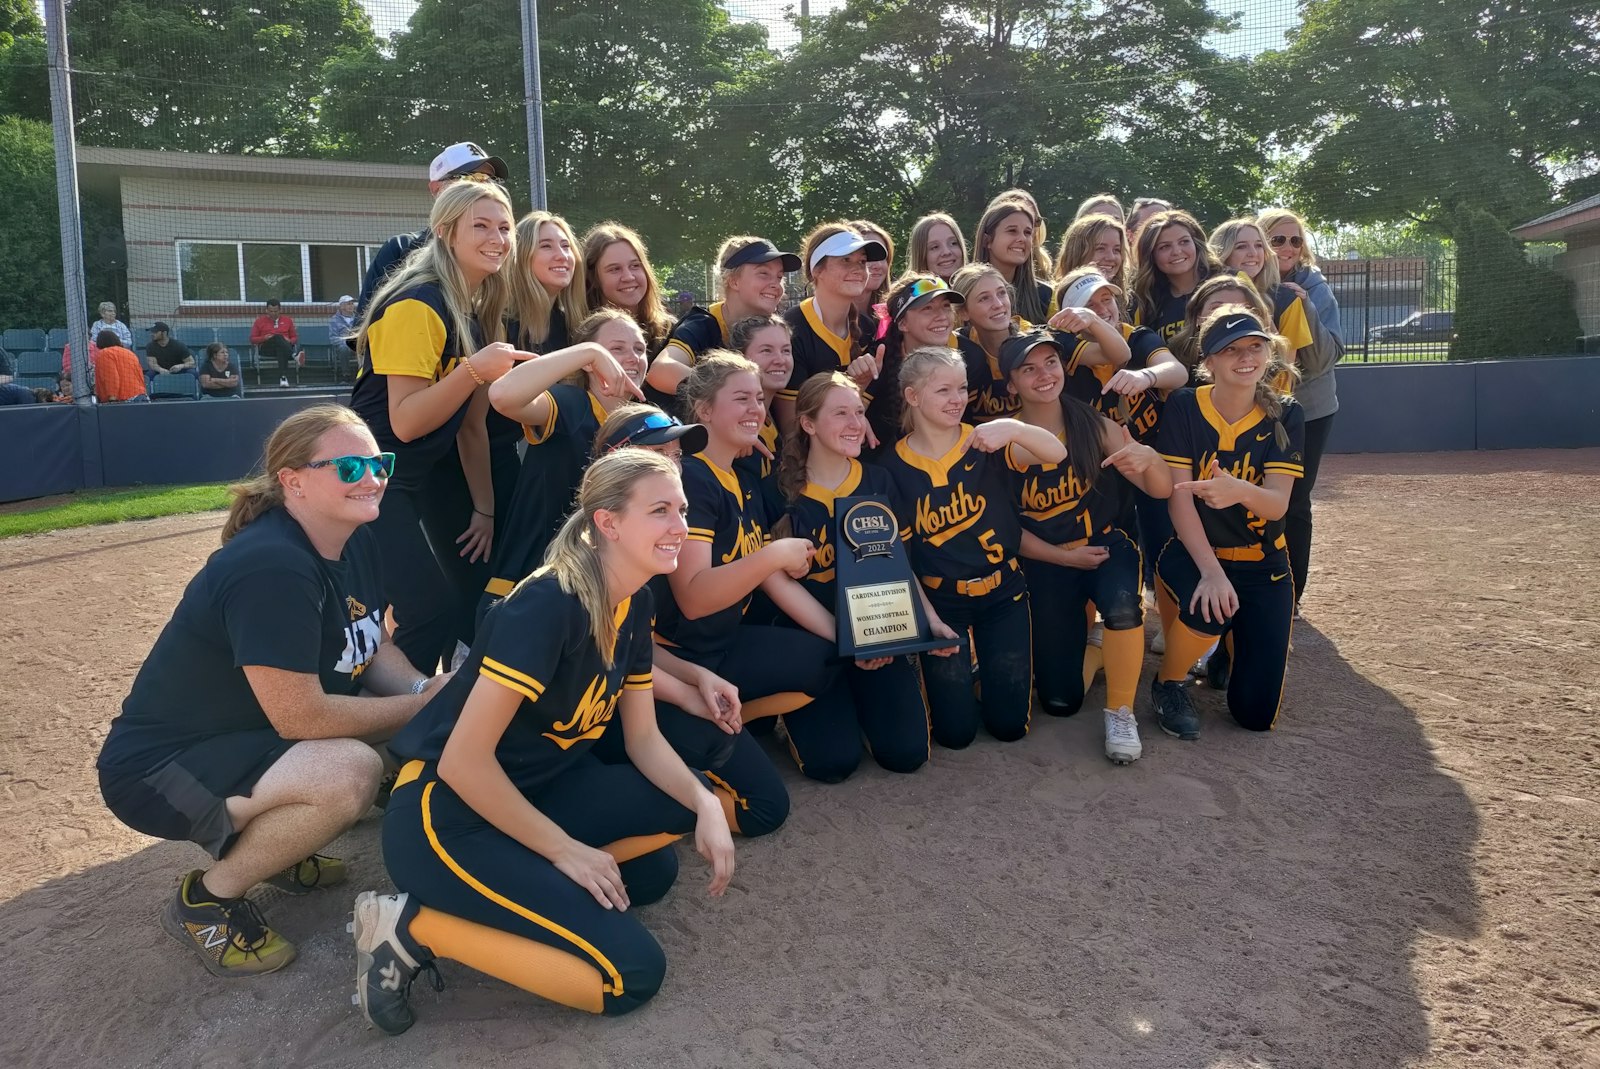 Macomb Lutheran North jumped out to a 3-0 lead in the first inning, then had to rally with three runs in their last at-bat to beat St. Catherine of   Siena for the CHSL Cardinal Division trophy, its second title in three years.